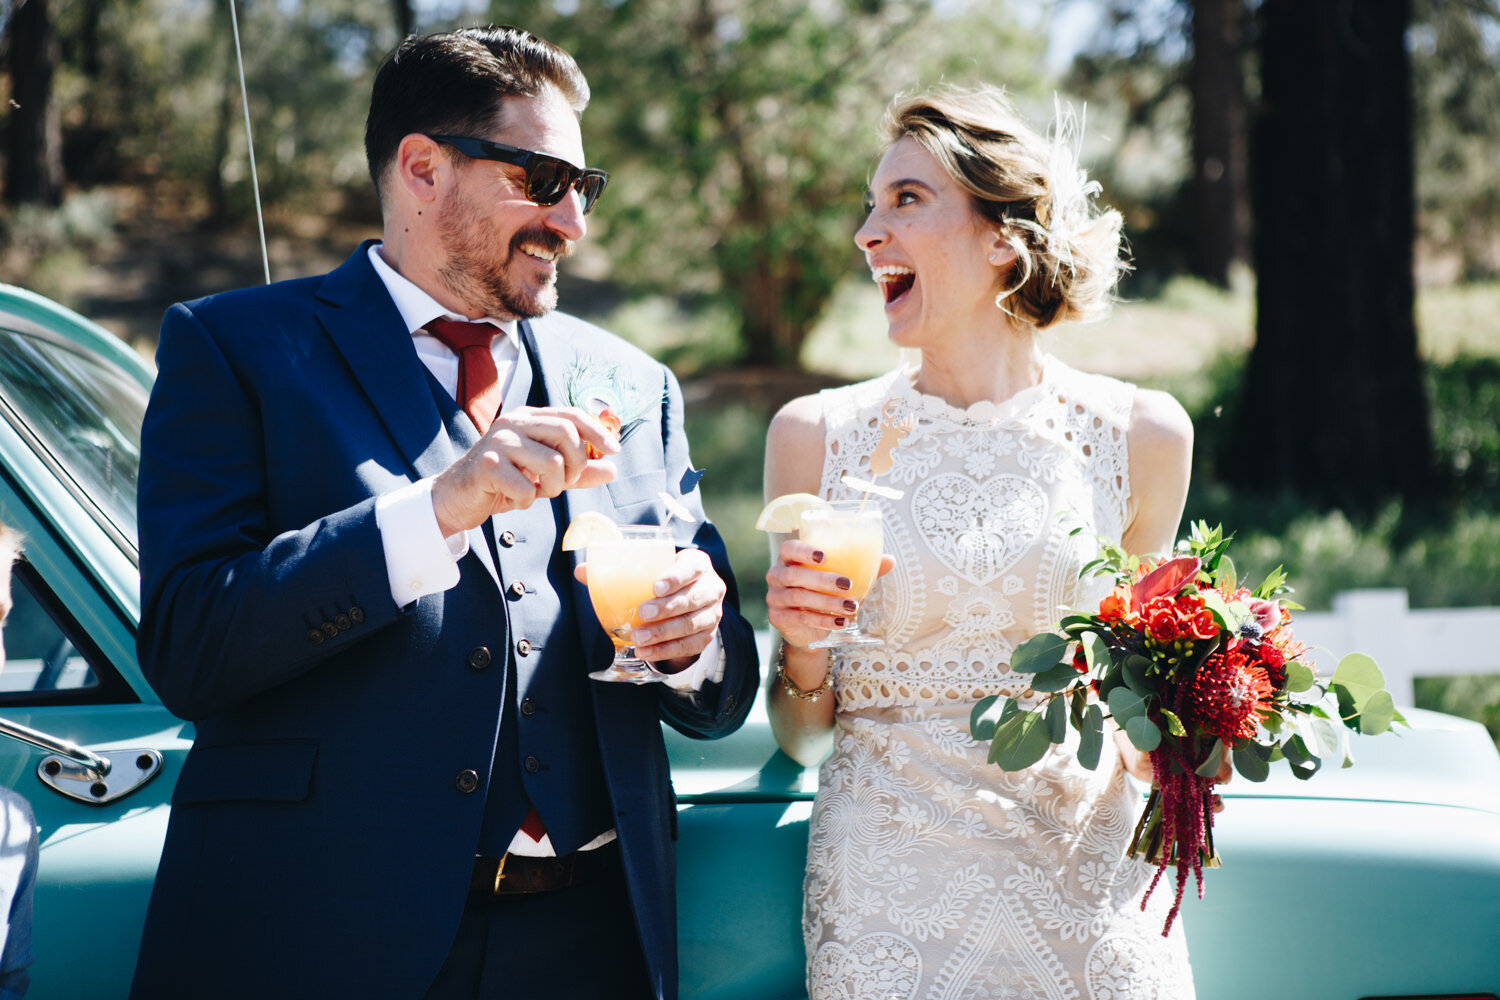 Bride and Groom smiling while holding cocktails